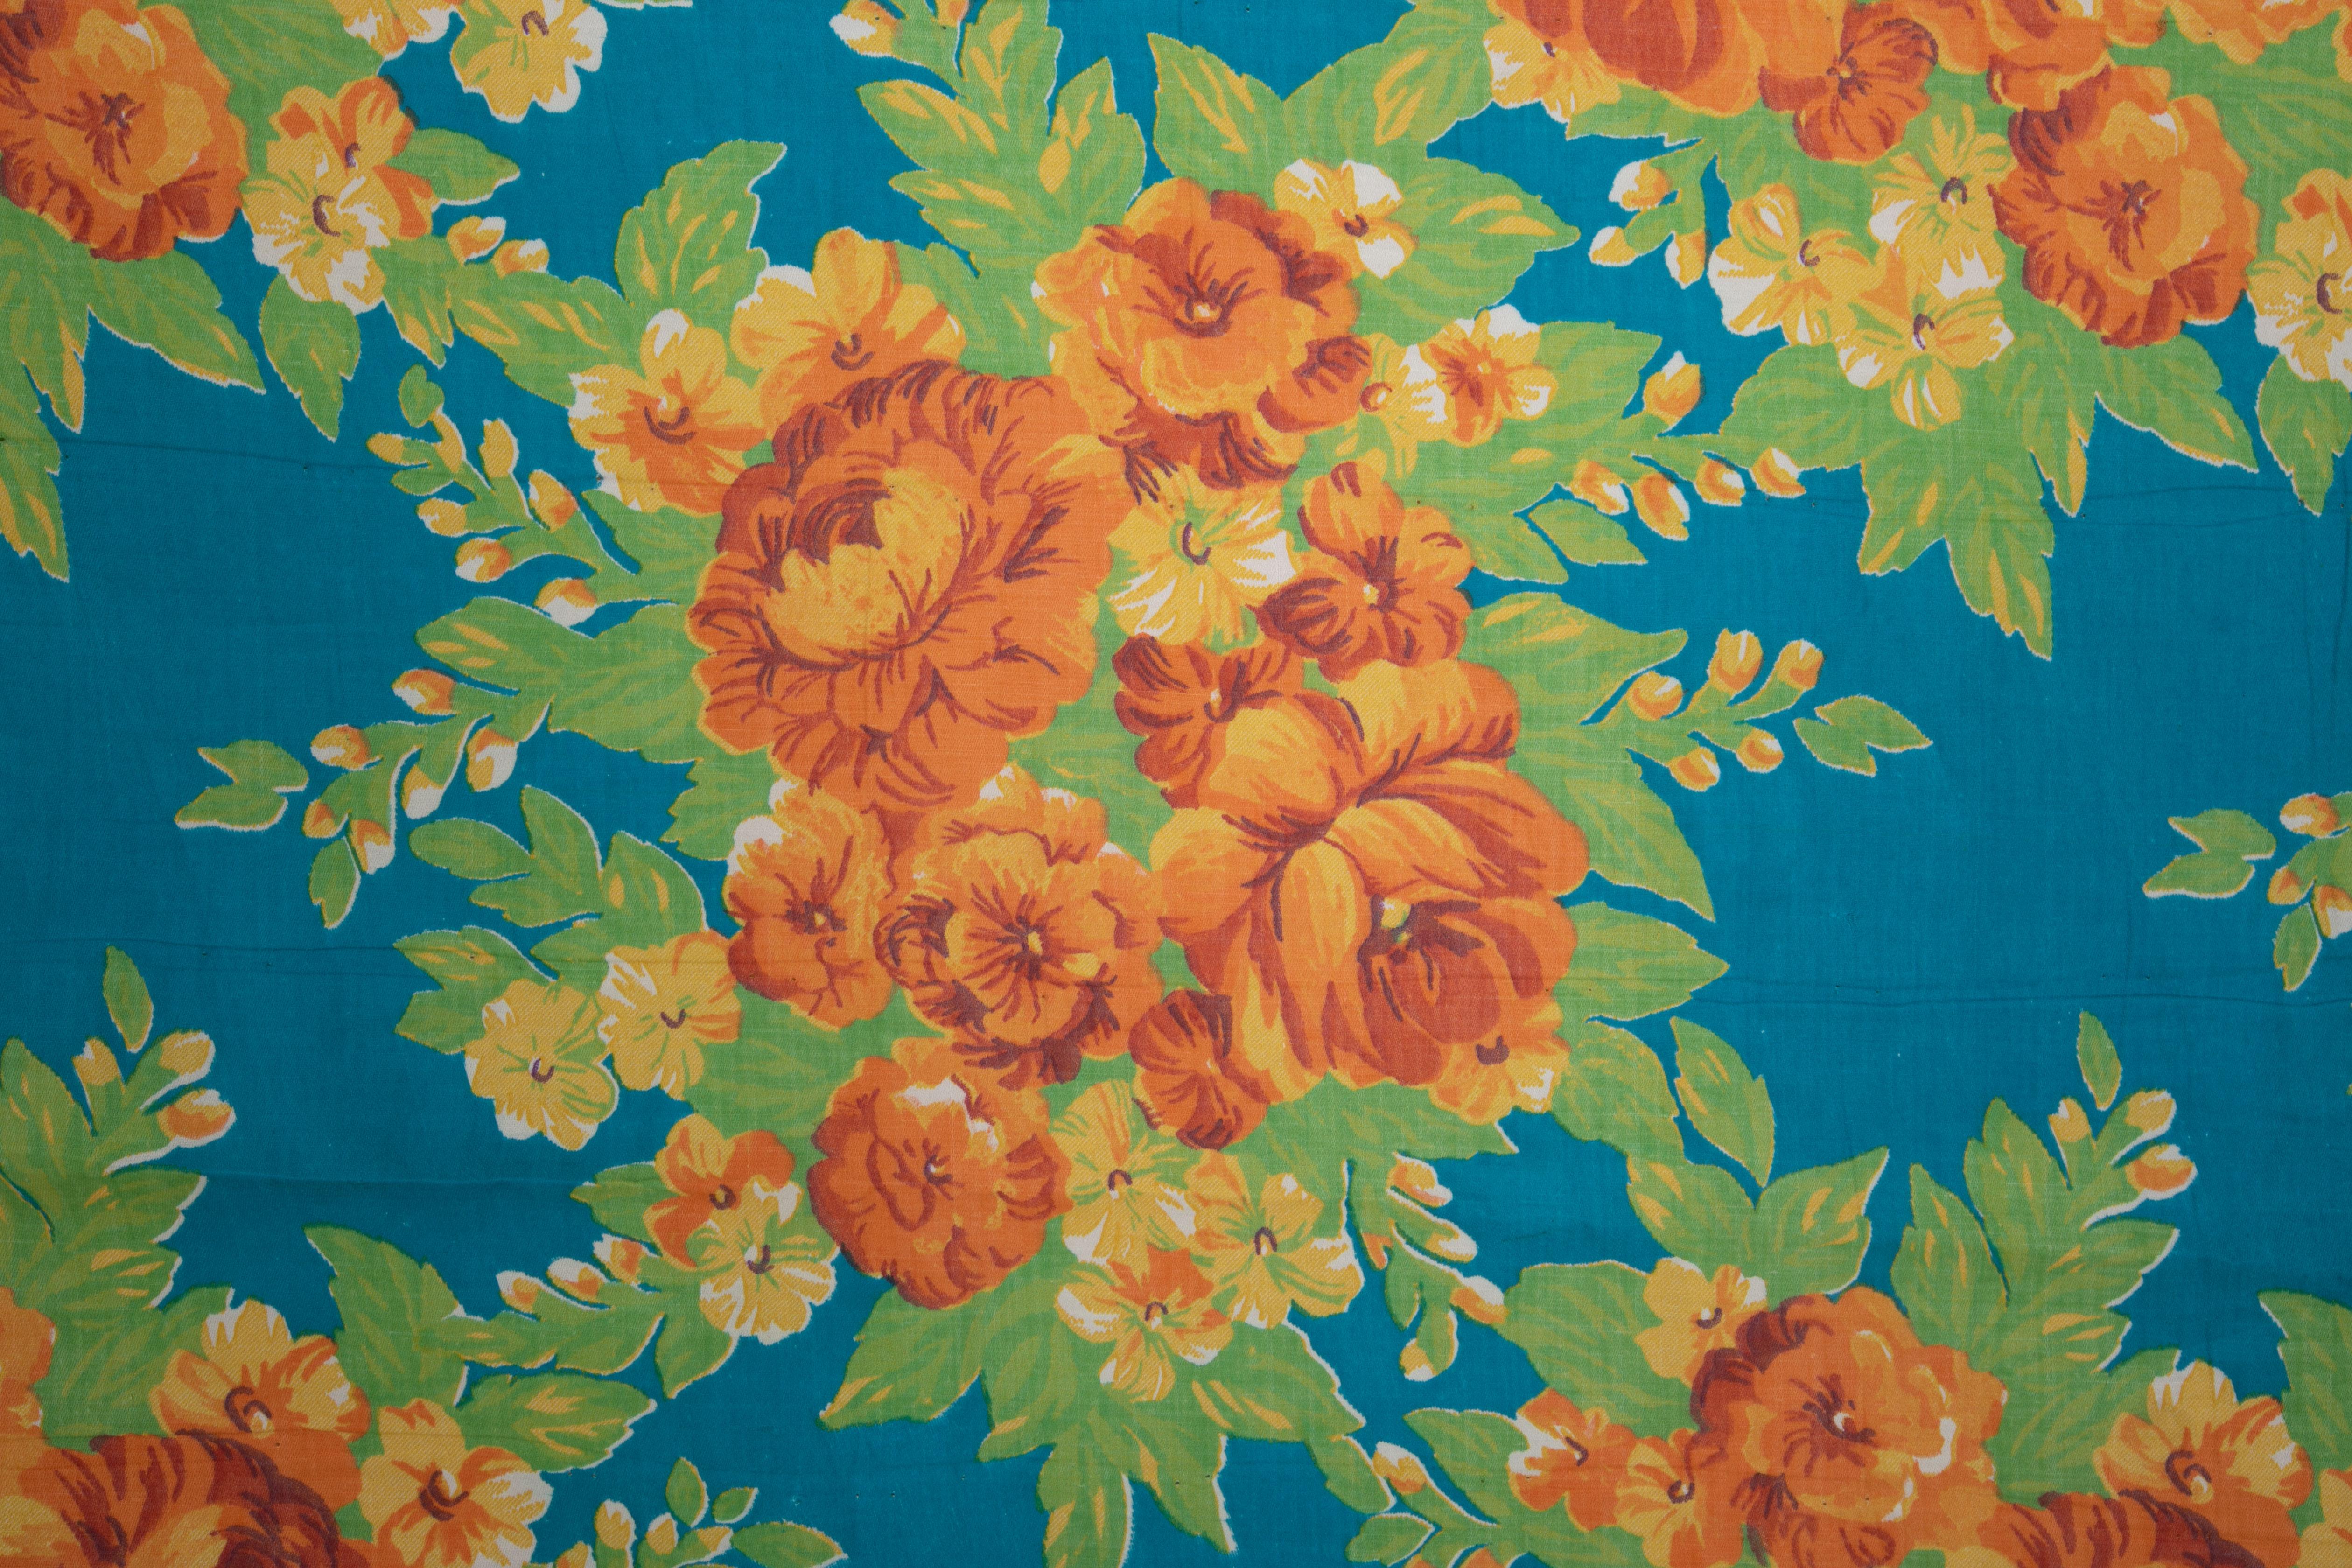 Woven Russian Roller Printed Cotton Fabric Panel, Mid-20th Century or Earlier For Sale